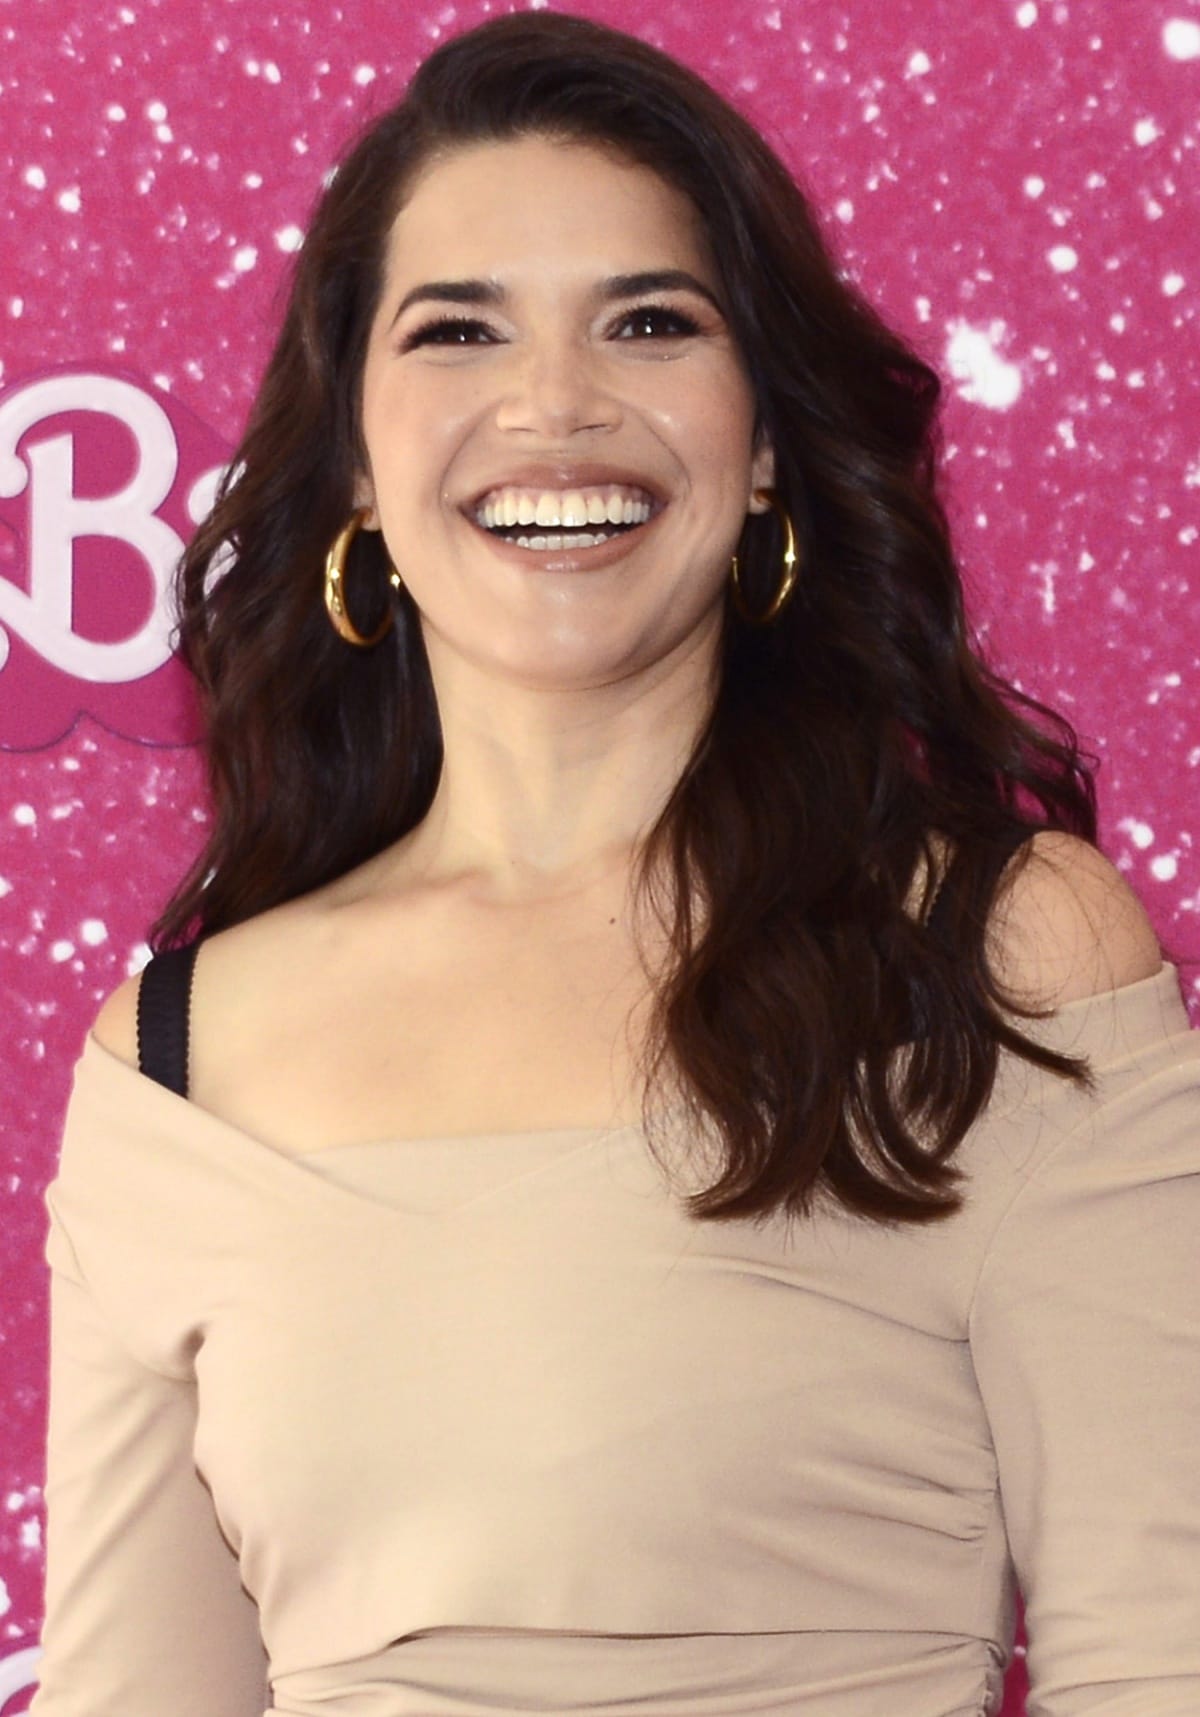 America Ferrera’s beauty look consisted of voluminous curls, large gold hoops, and a neutral makeup palette